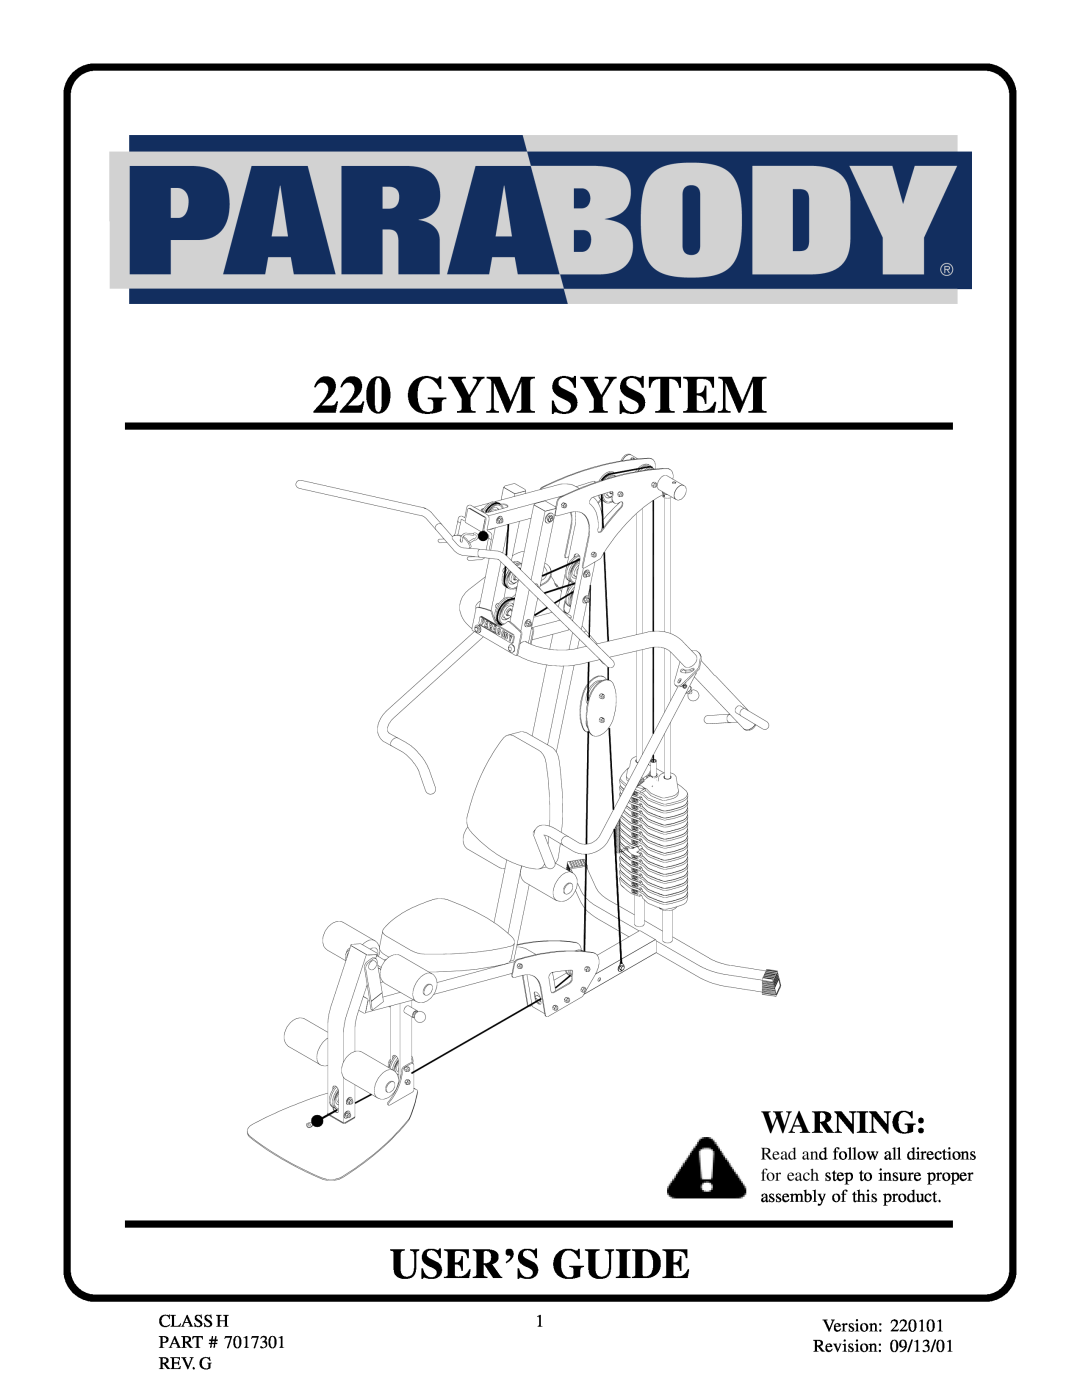 ParaBody 220 manual User’S Guide, Gym System 